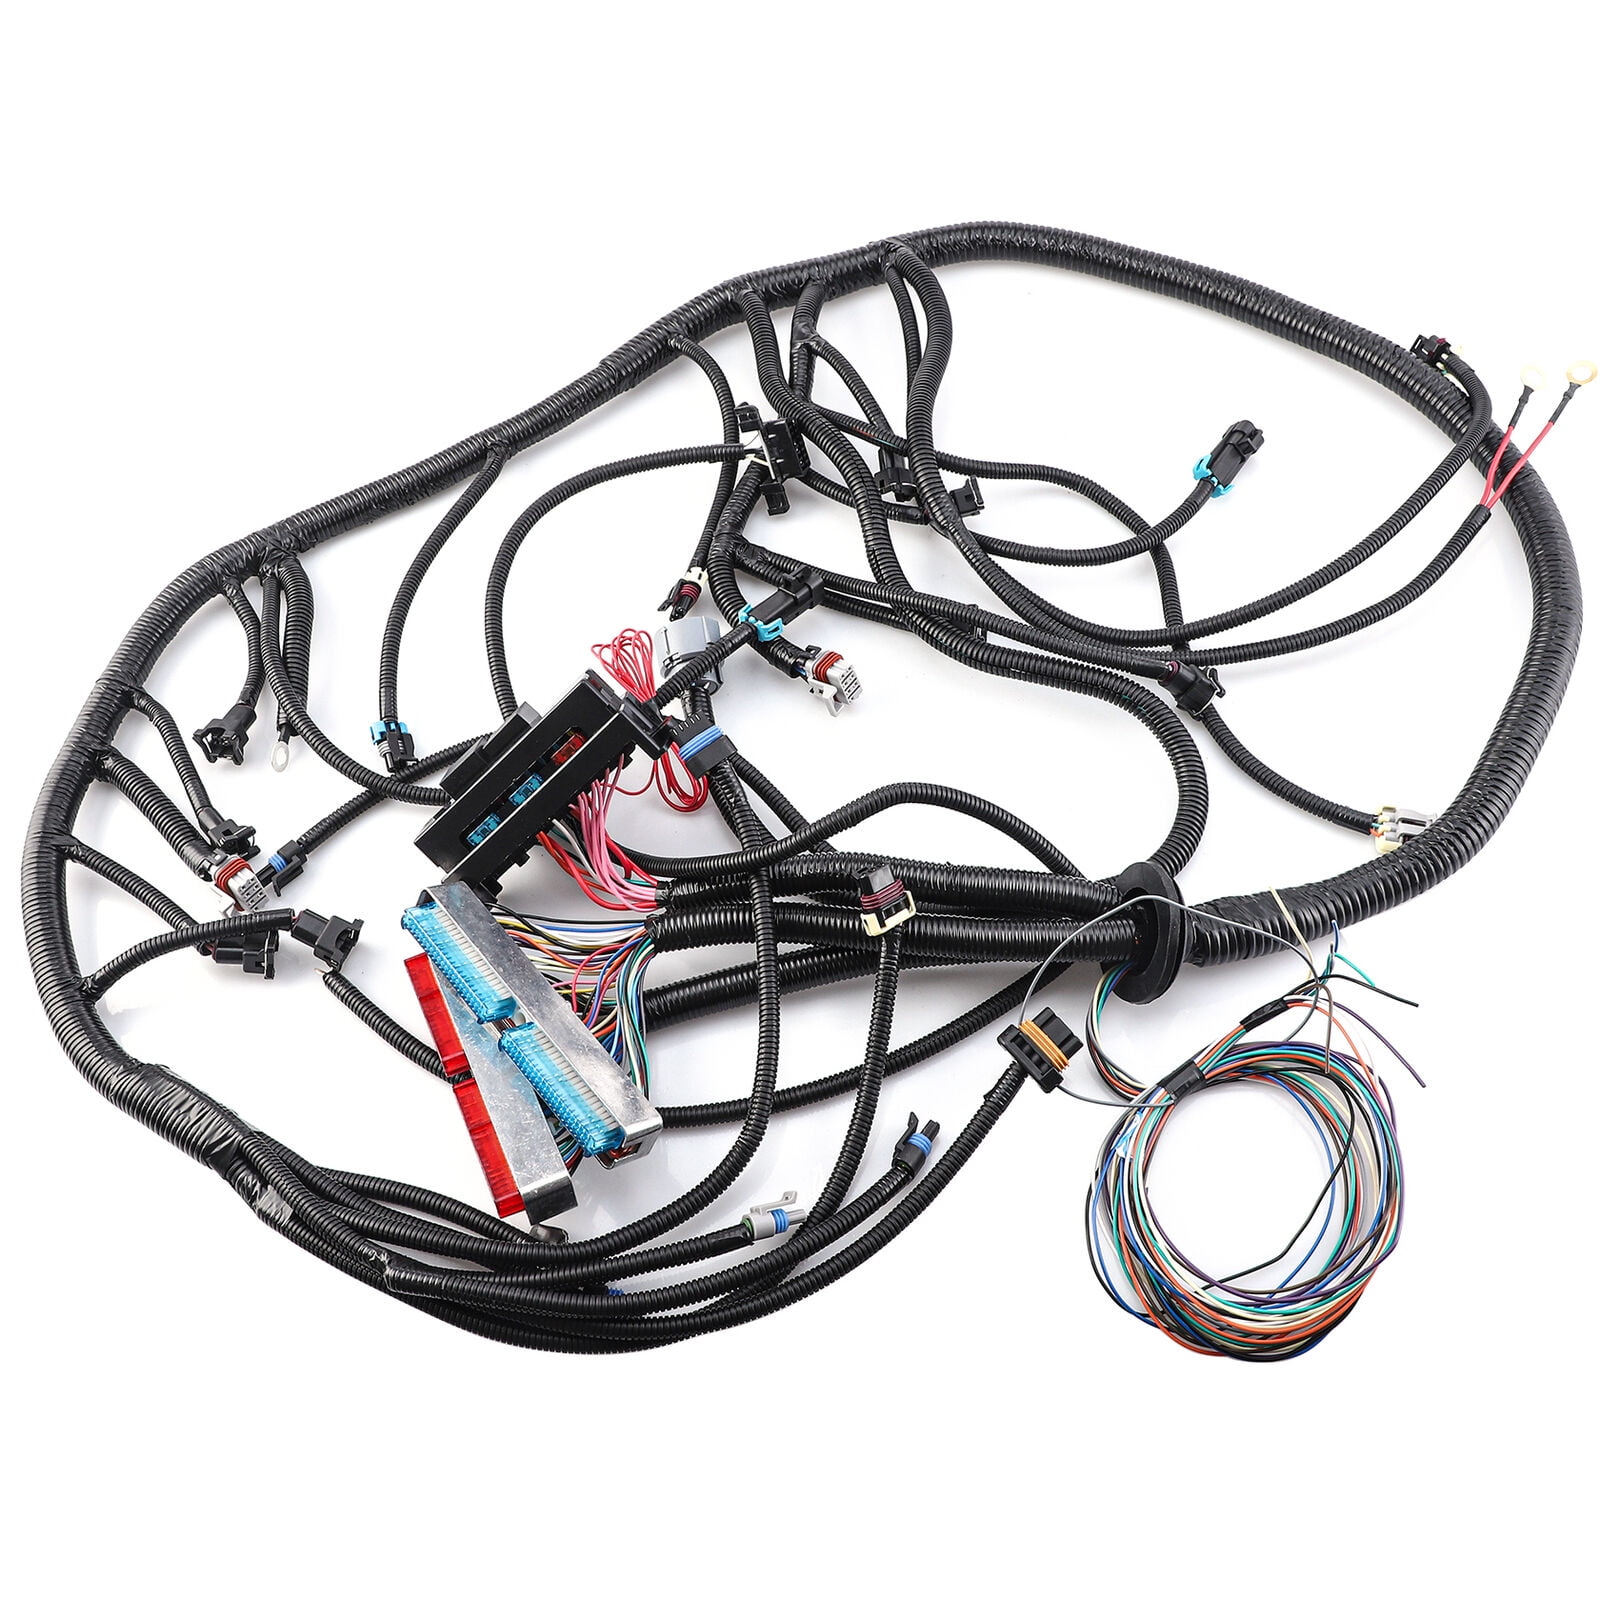 4L60E Standalone Wiring Harness W/EV1 Fuel Injector Connectors Compatible with 1997-2006 DBC LS1 4.8 5.3 6.0 Complete Engine Wiring Harness 